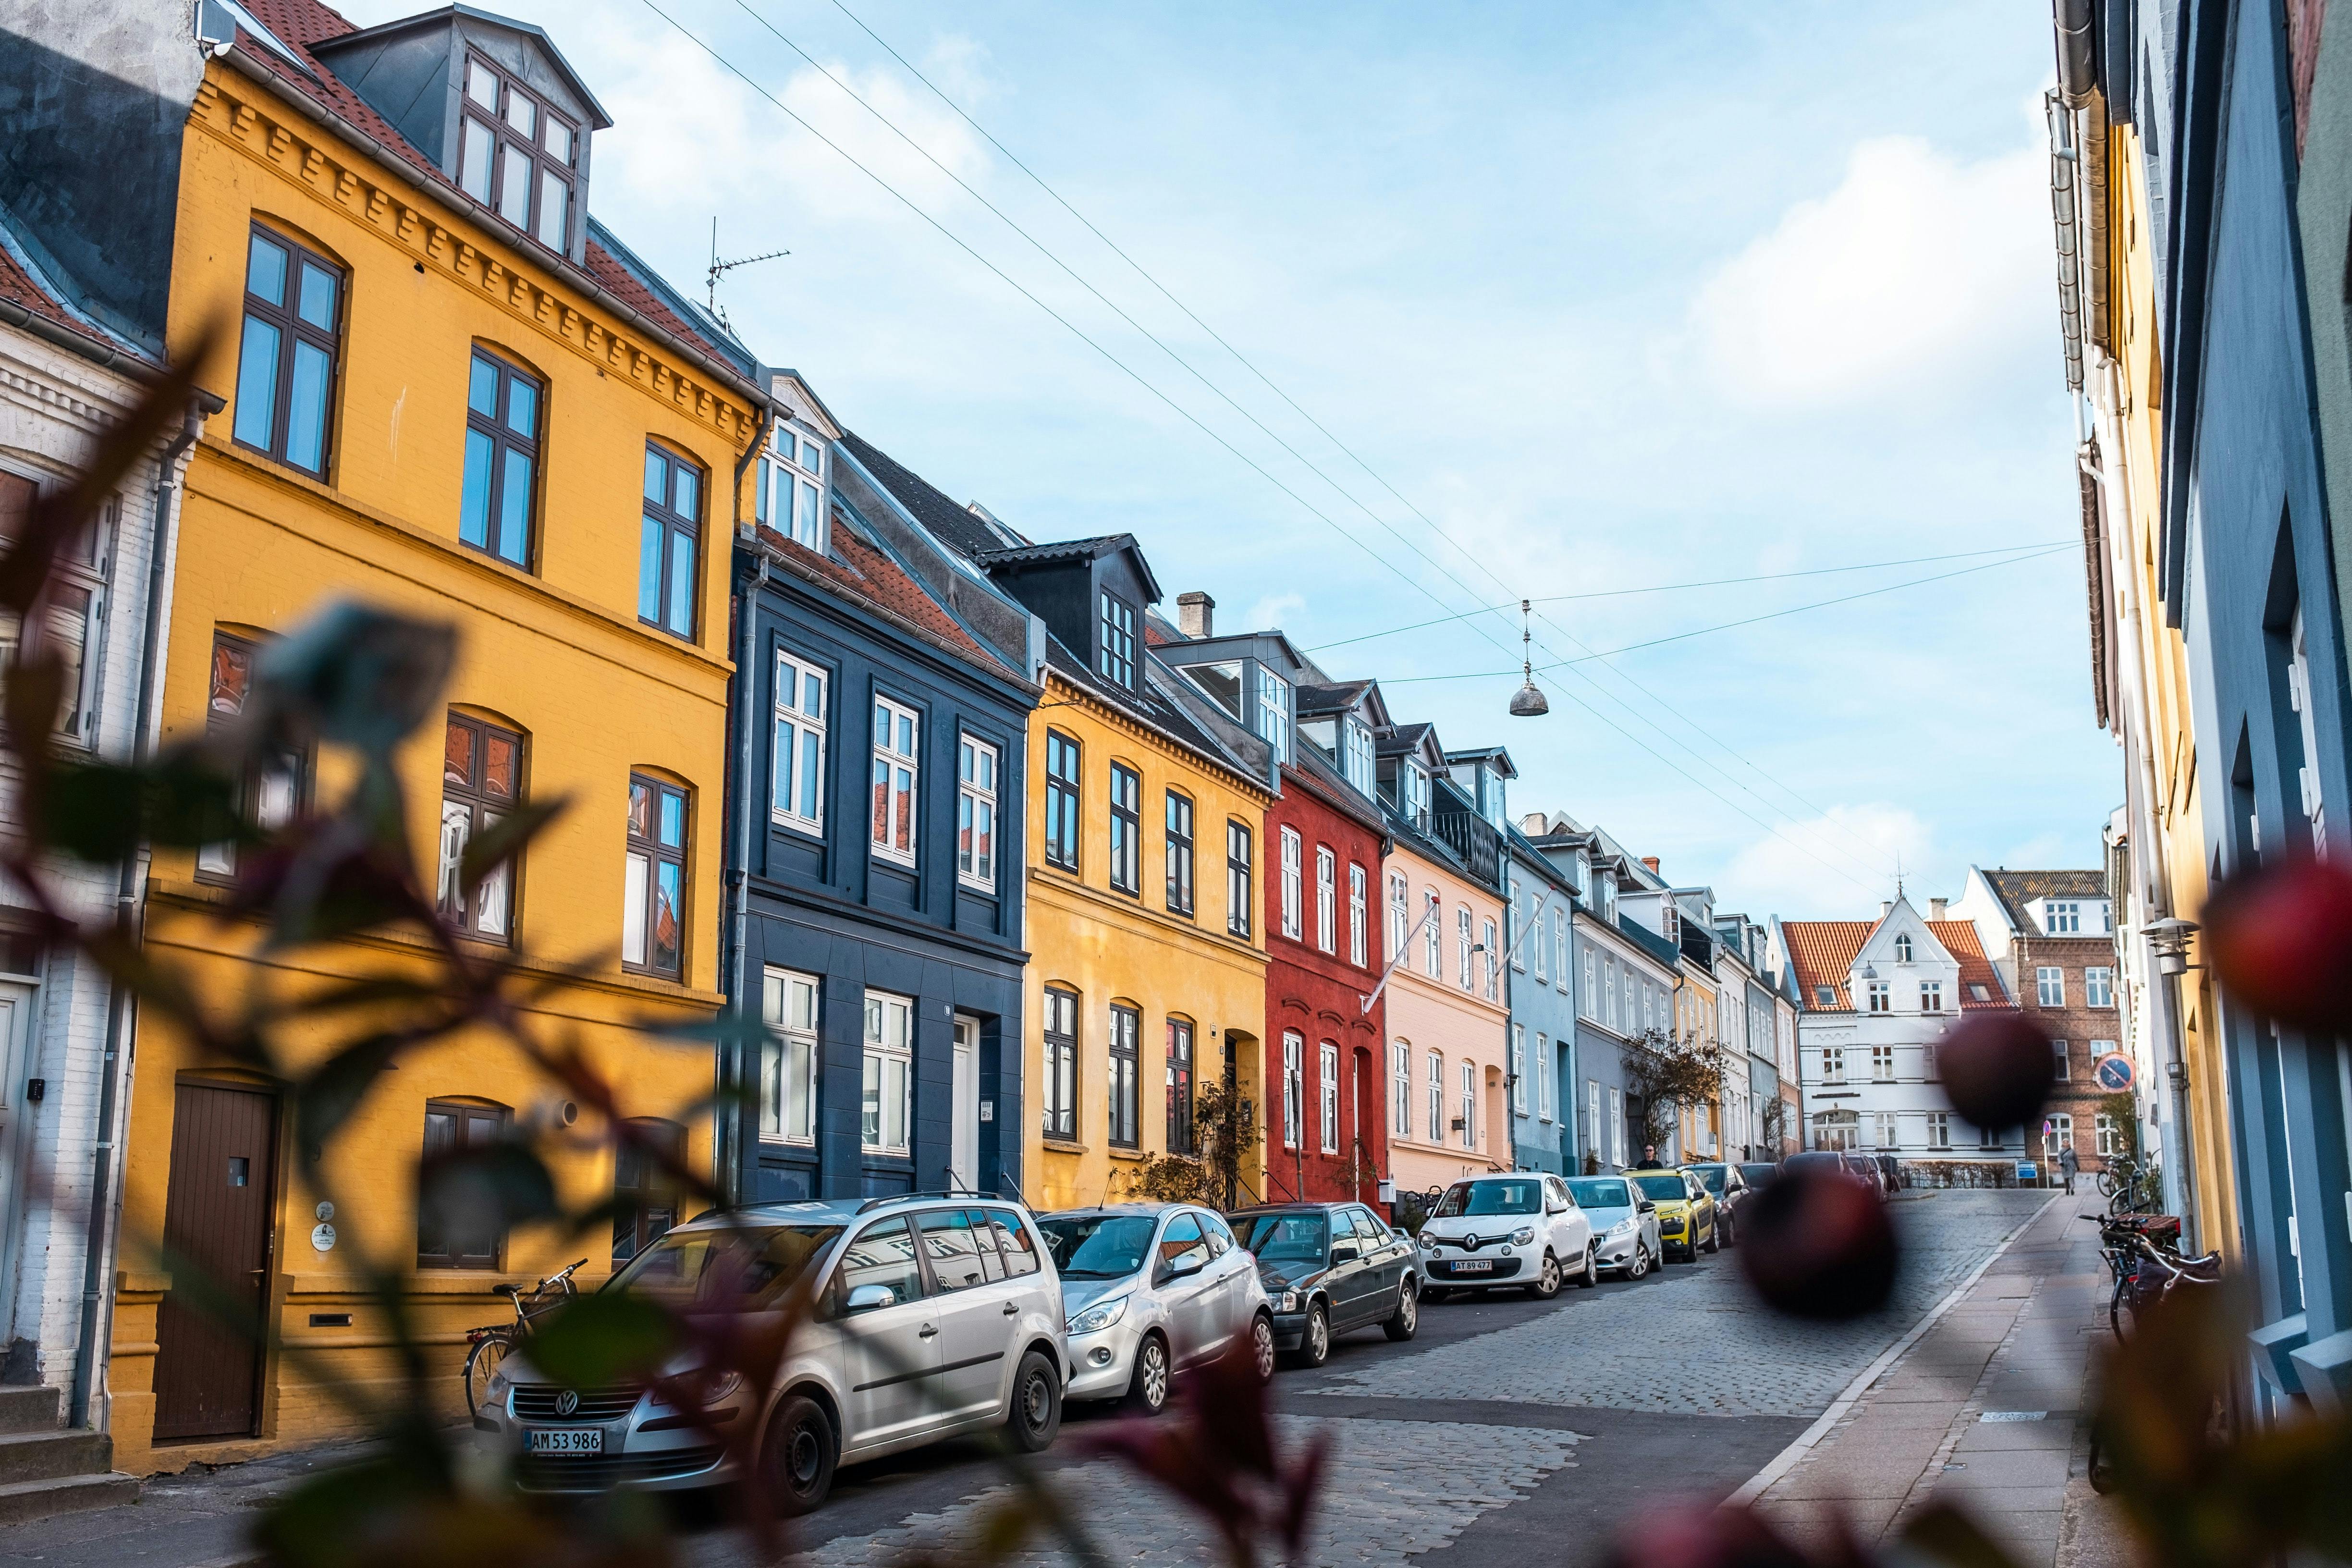 Explore the Instaworthy spots of Aarhus with a local